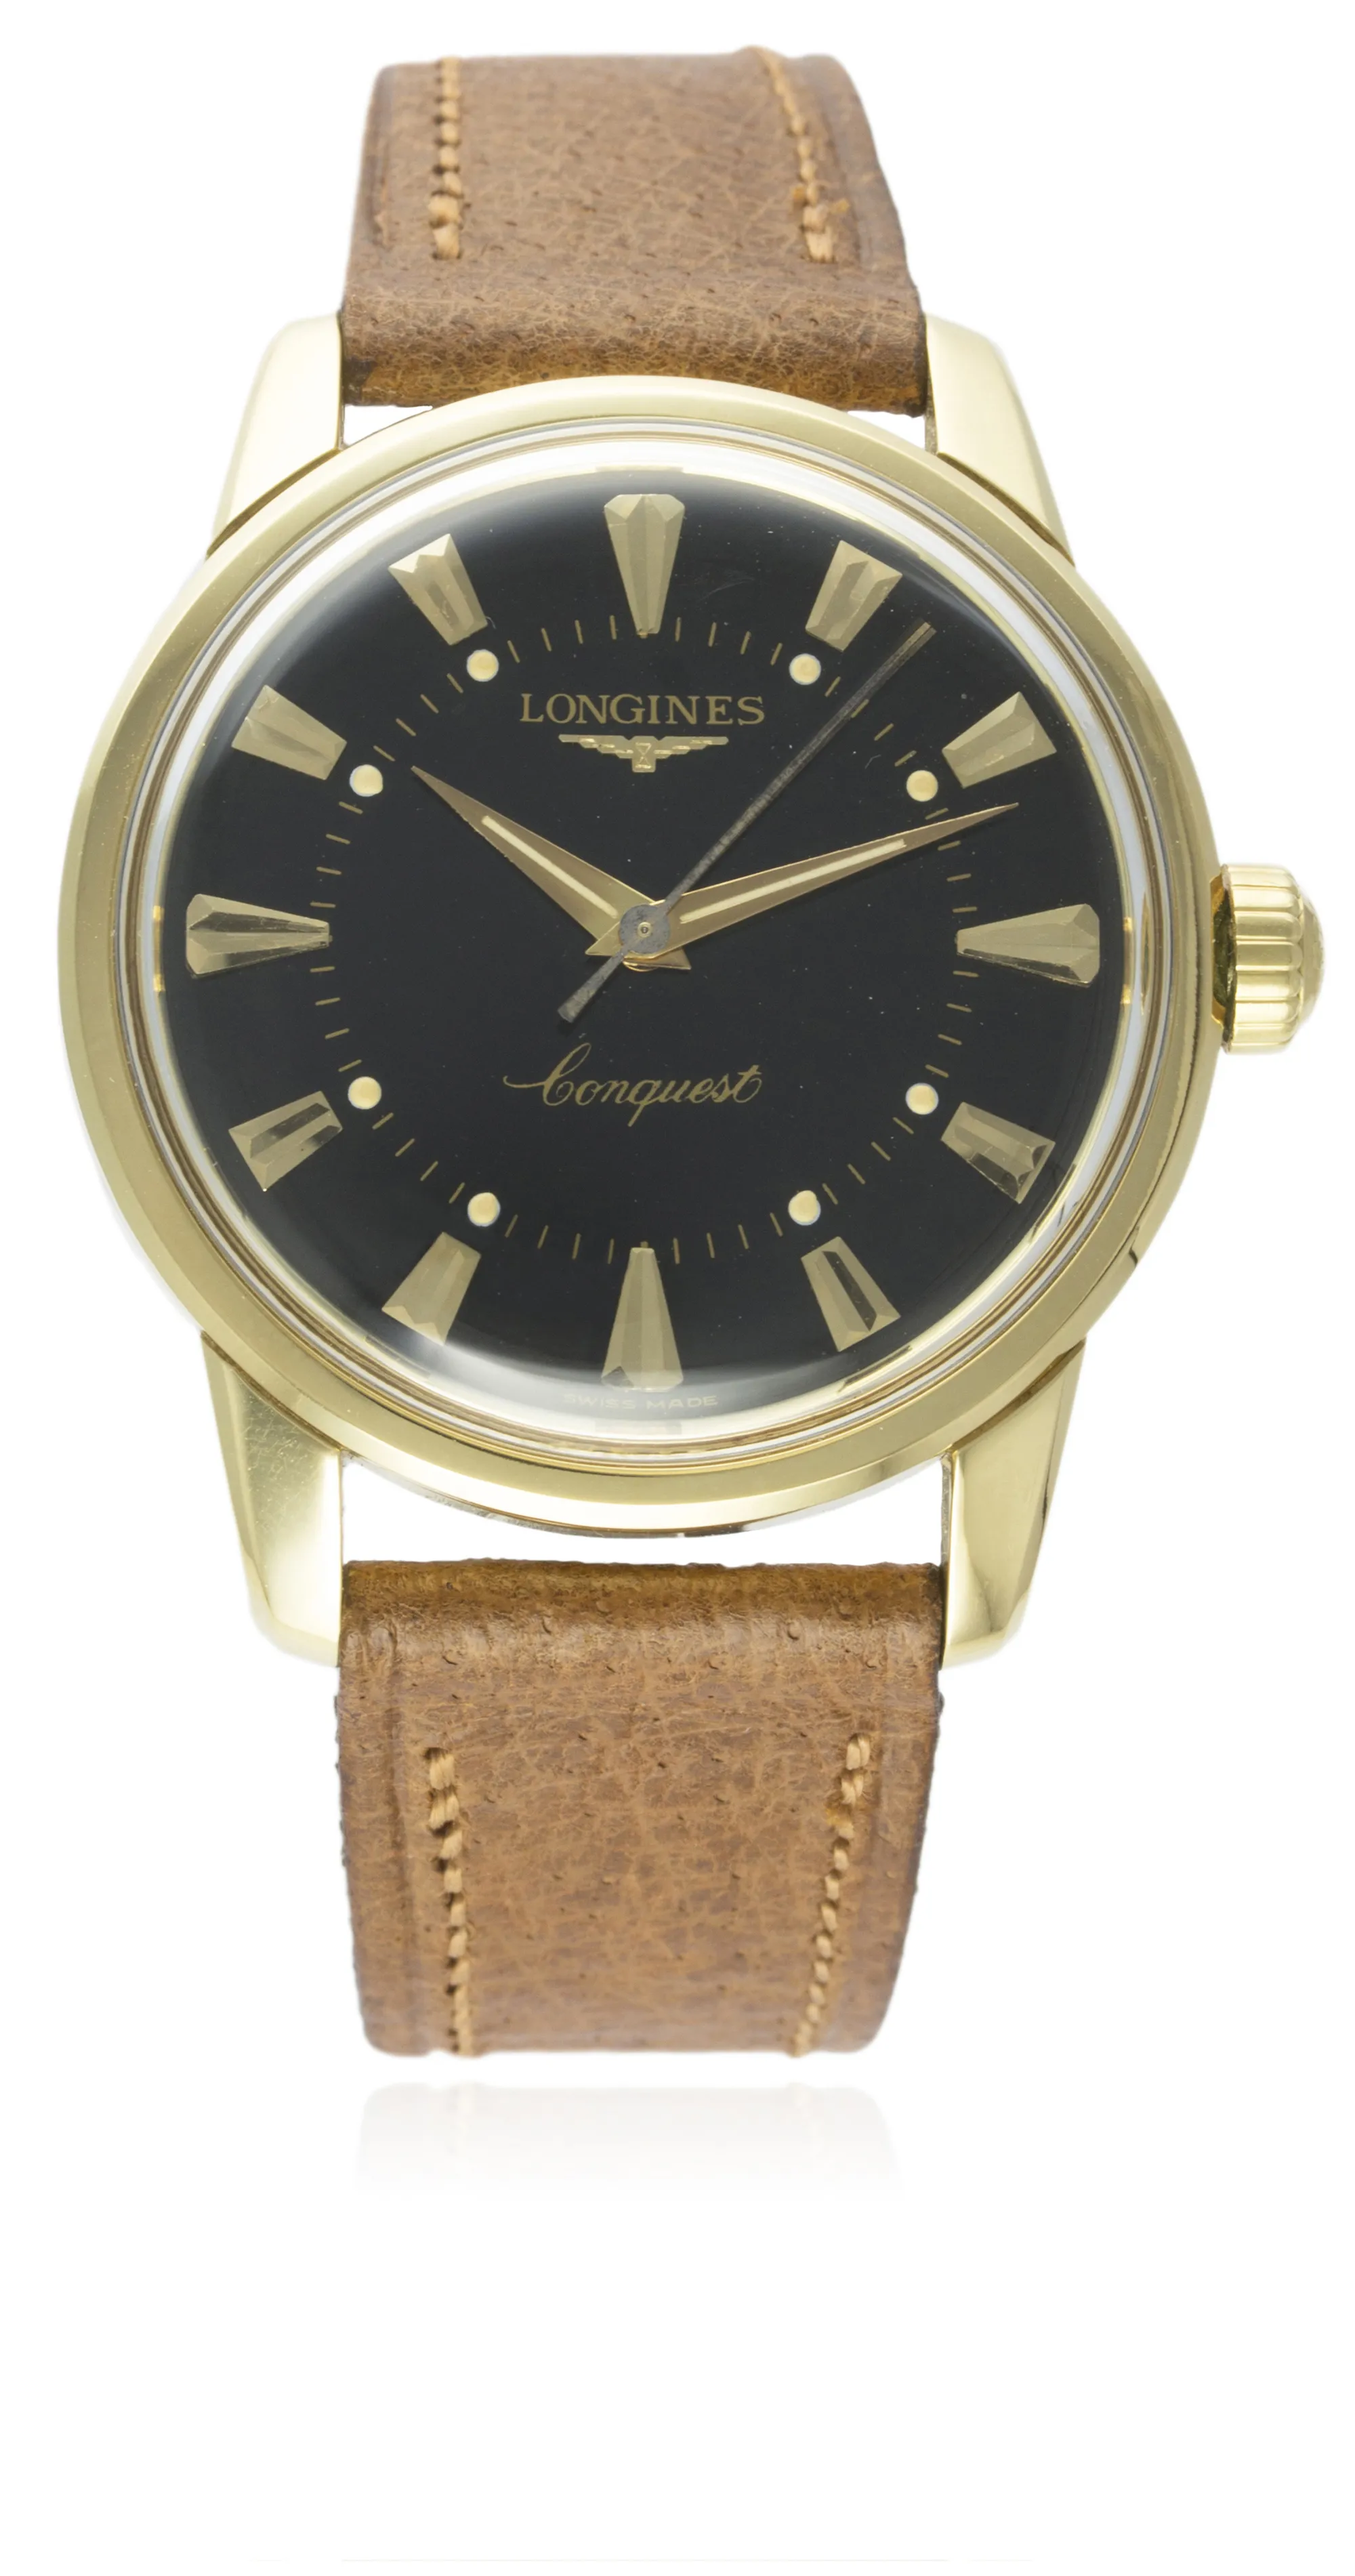 Longines Conquest 9001 2 35mm 18k solid gold Black